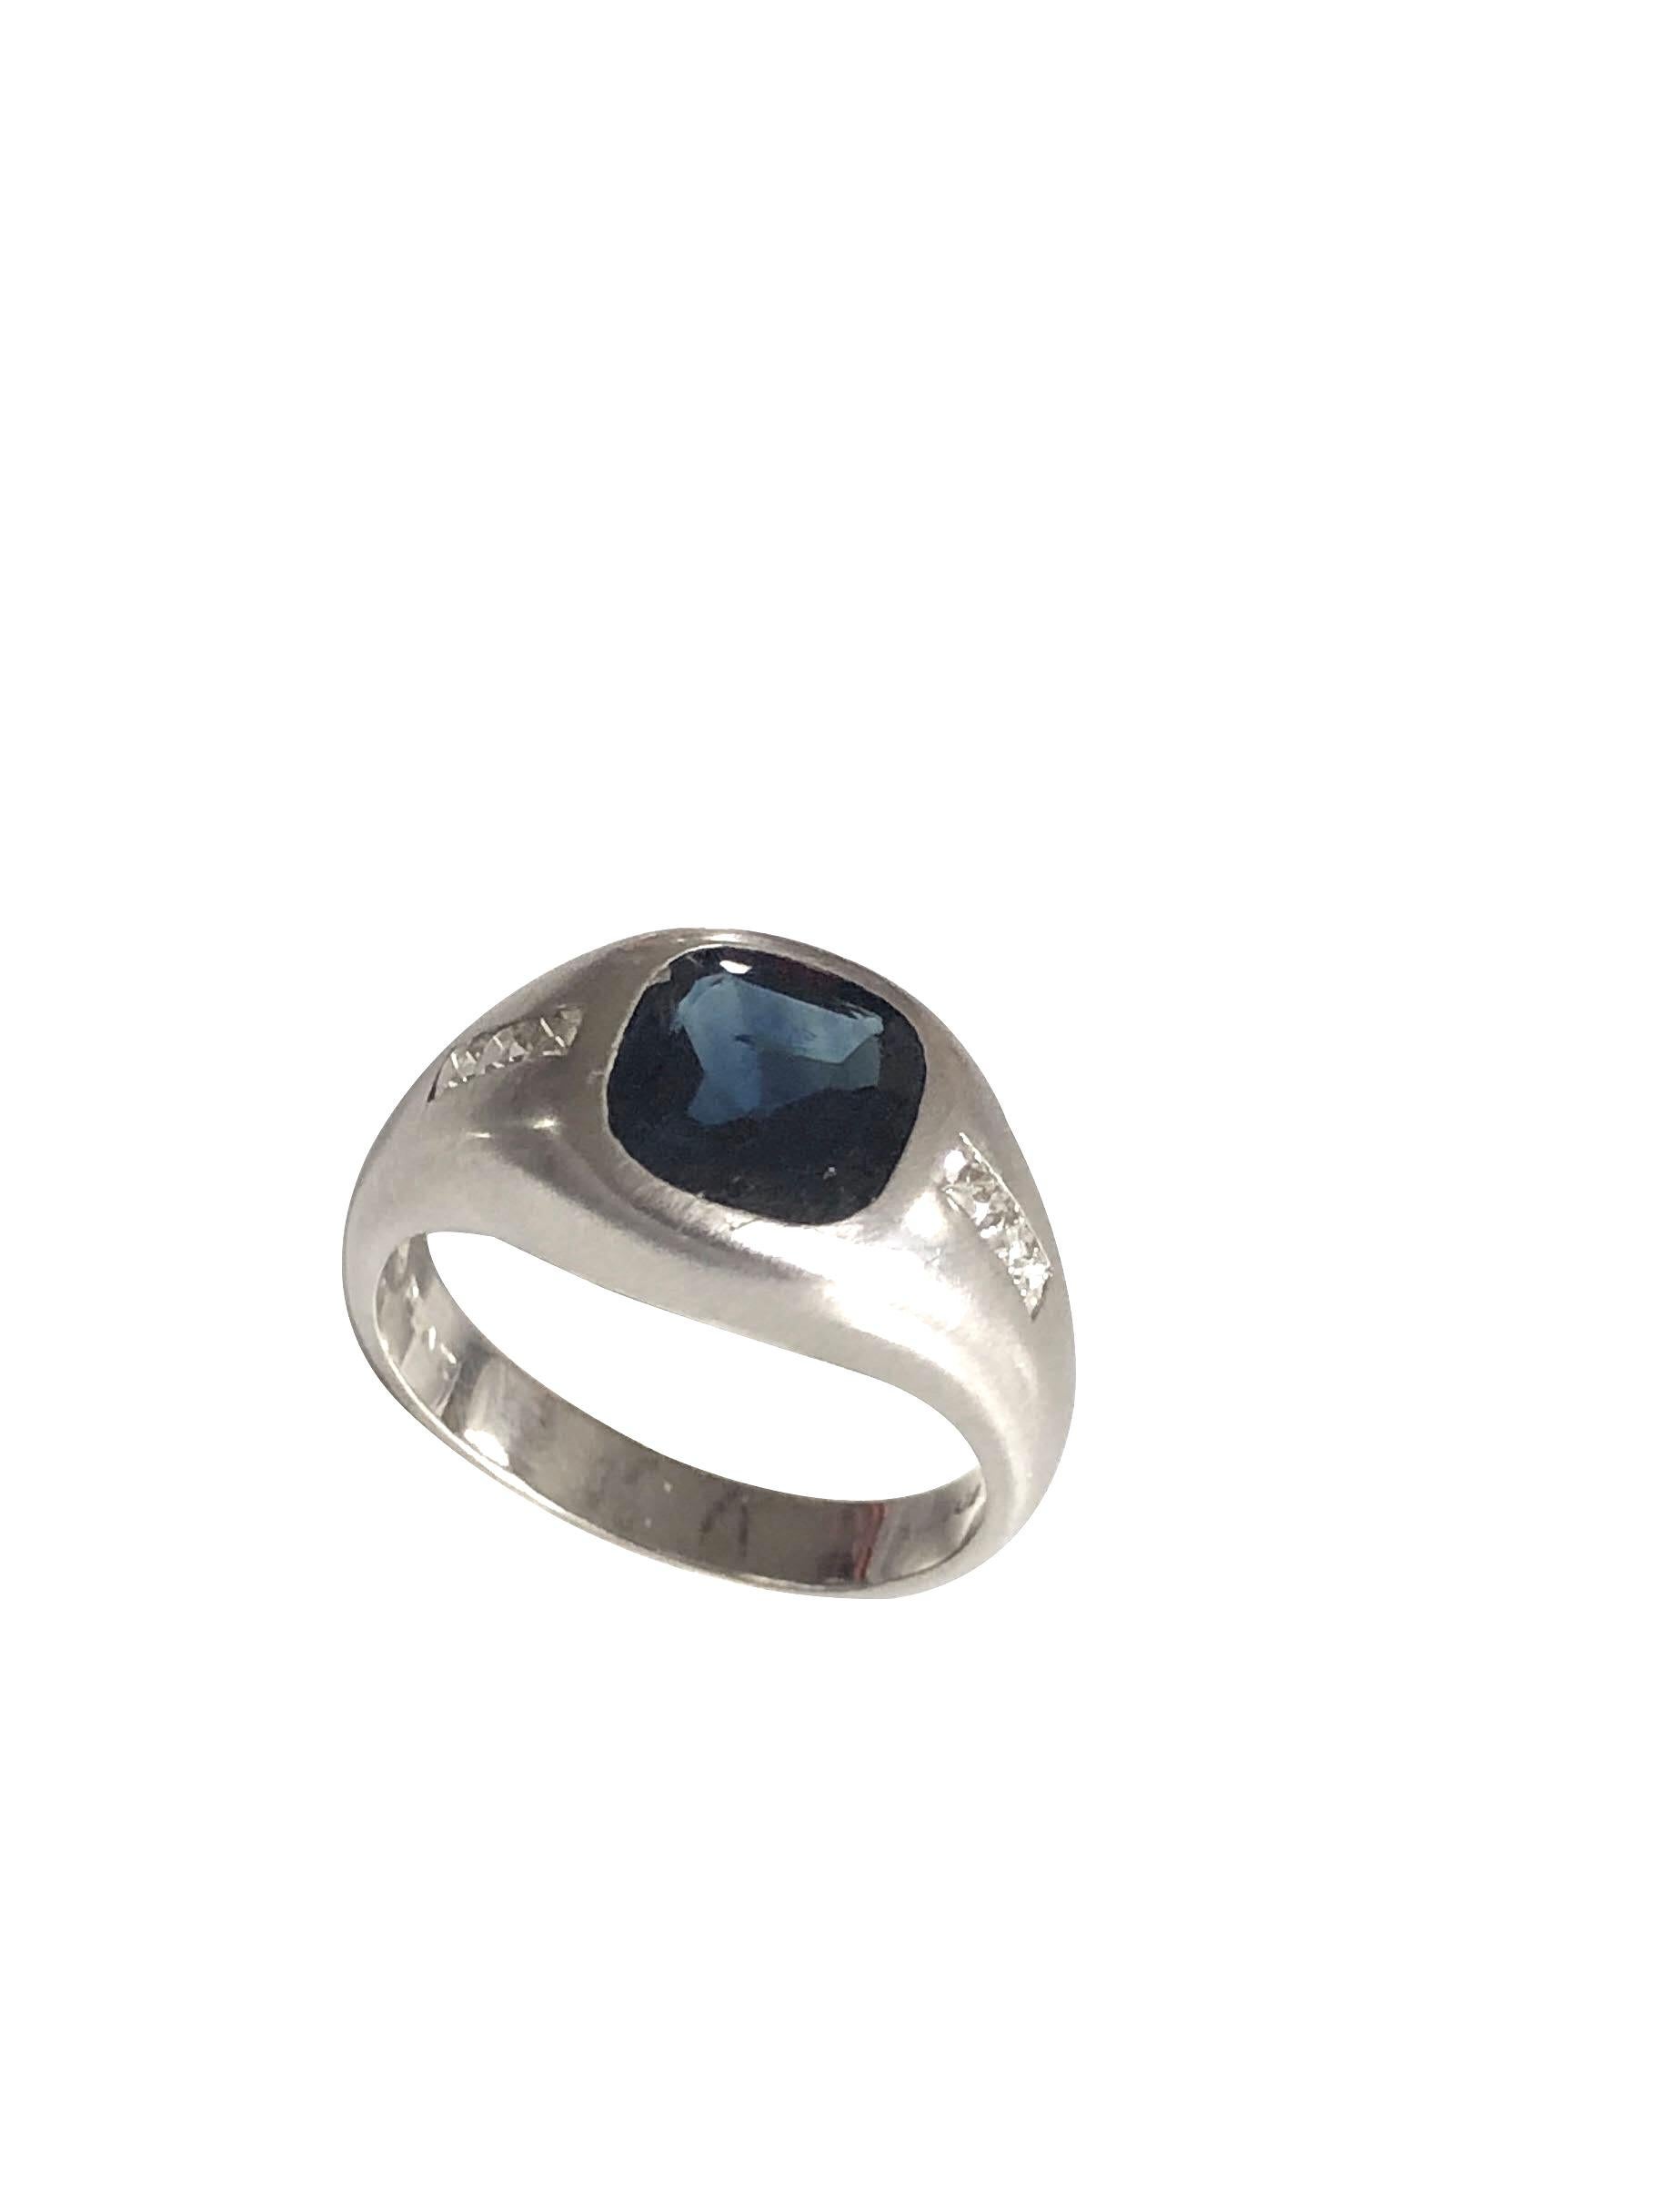 Circa 1930s Art Deco style Platinum Ring, centrally set with a Deep Blue Cushion Sapphire measuring 6.8 X 6.8 M.M. approximately 2.50 Carats, further set on either side with very fine white in color French cut Diamonds totaling approximately .20